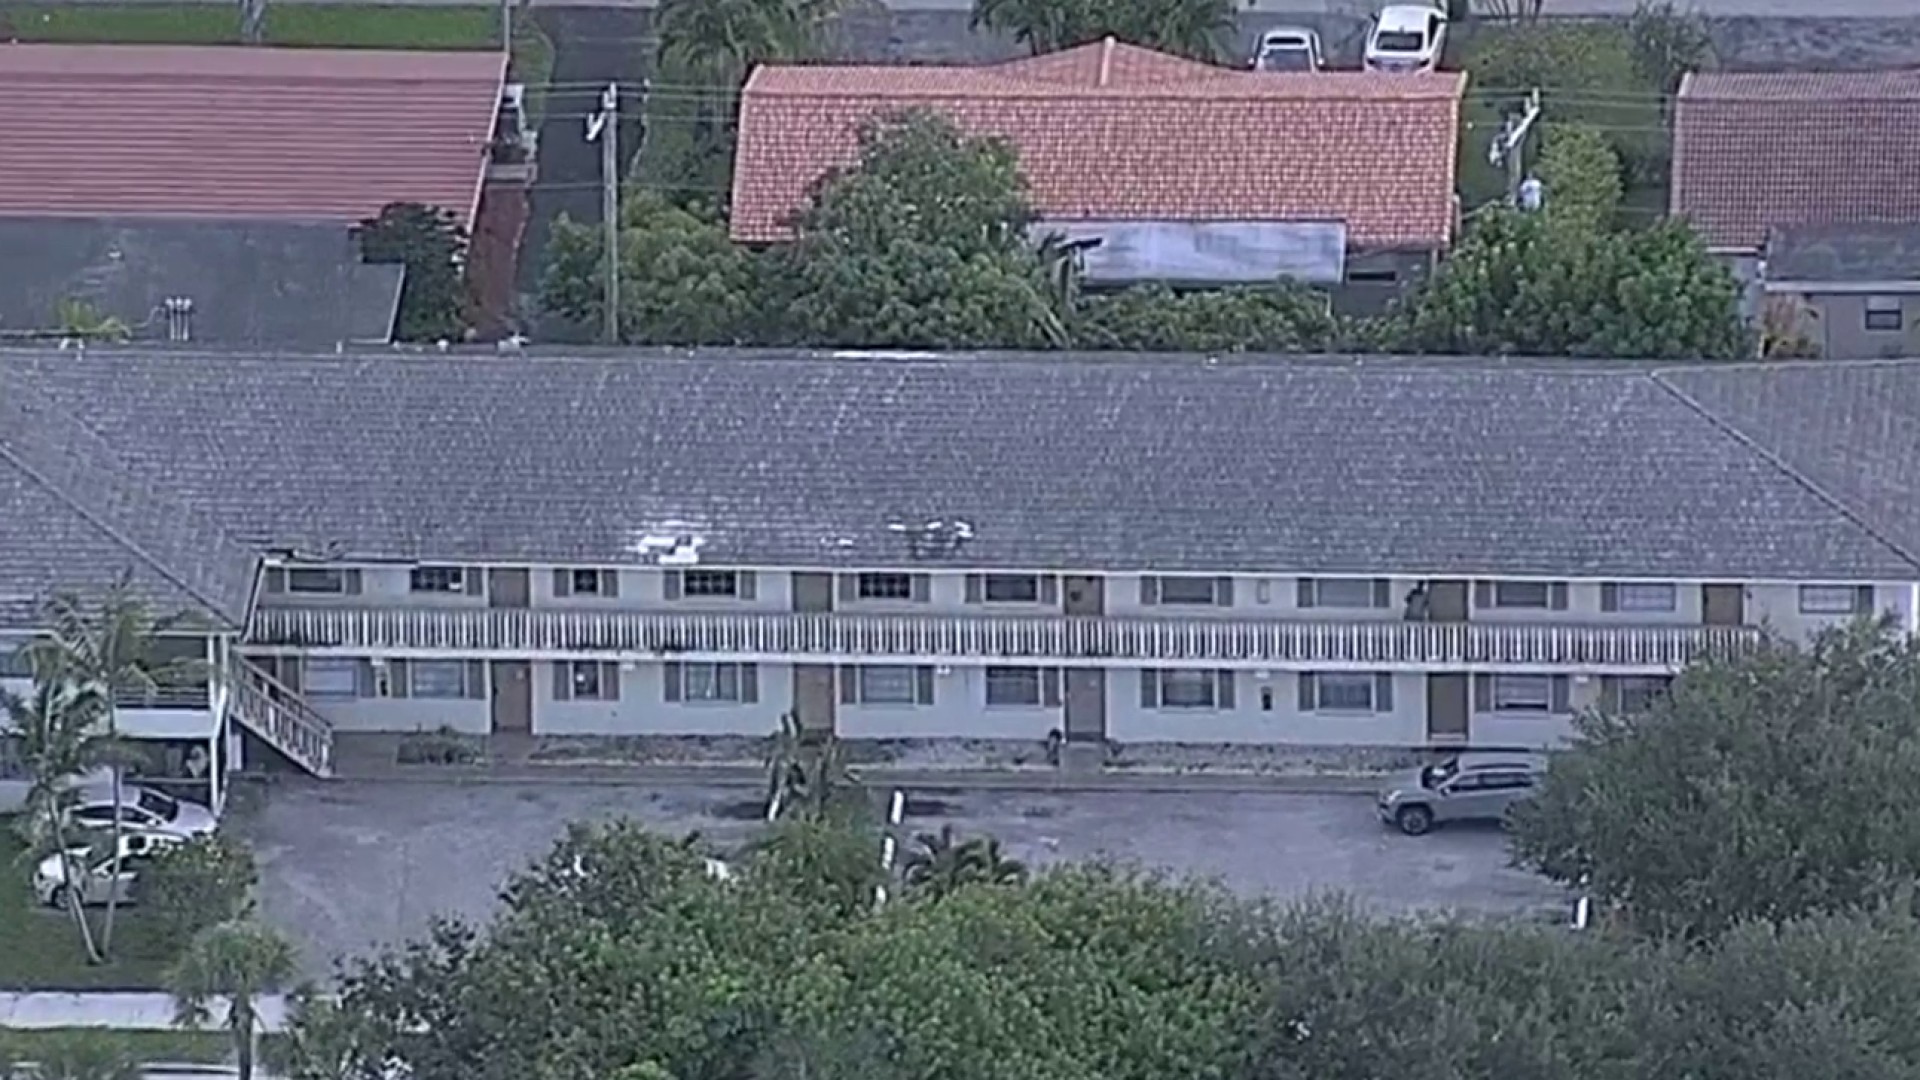 Residents Told to Vacate Coral Springs Condominium After Building Deemed Unsafe